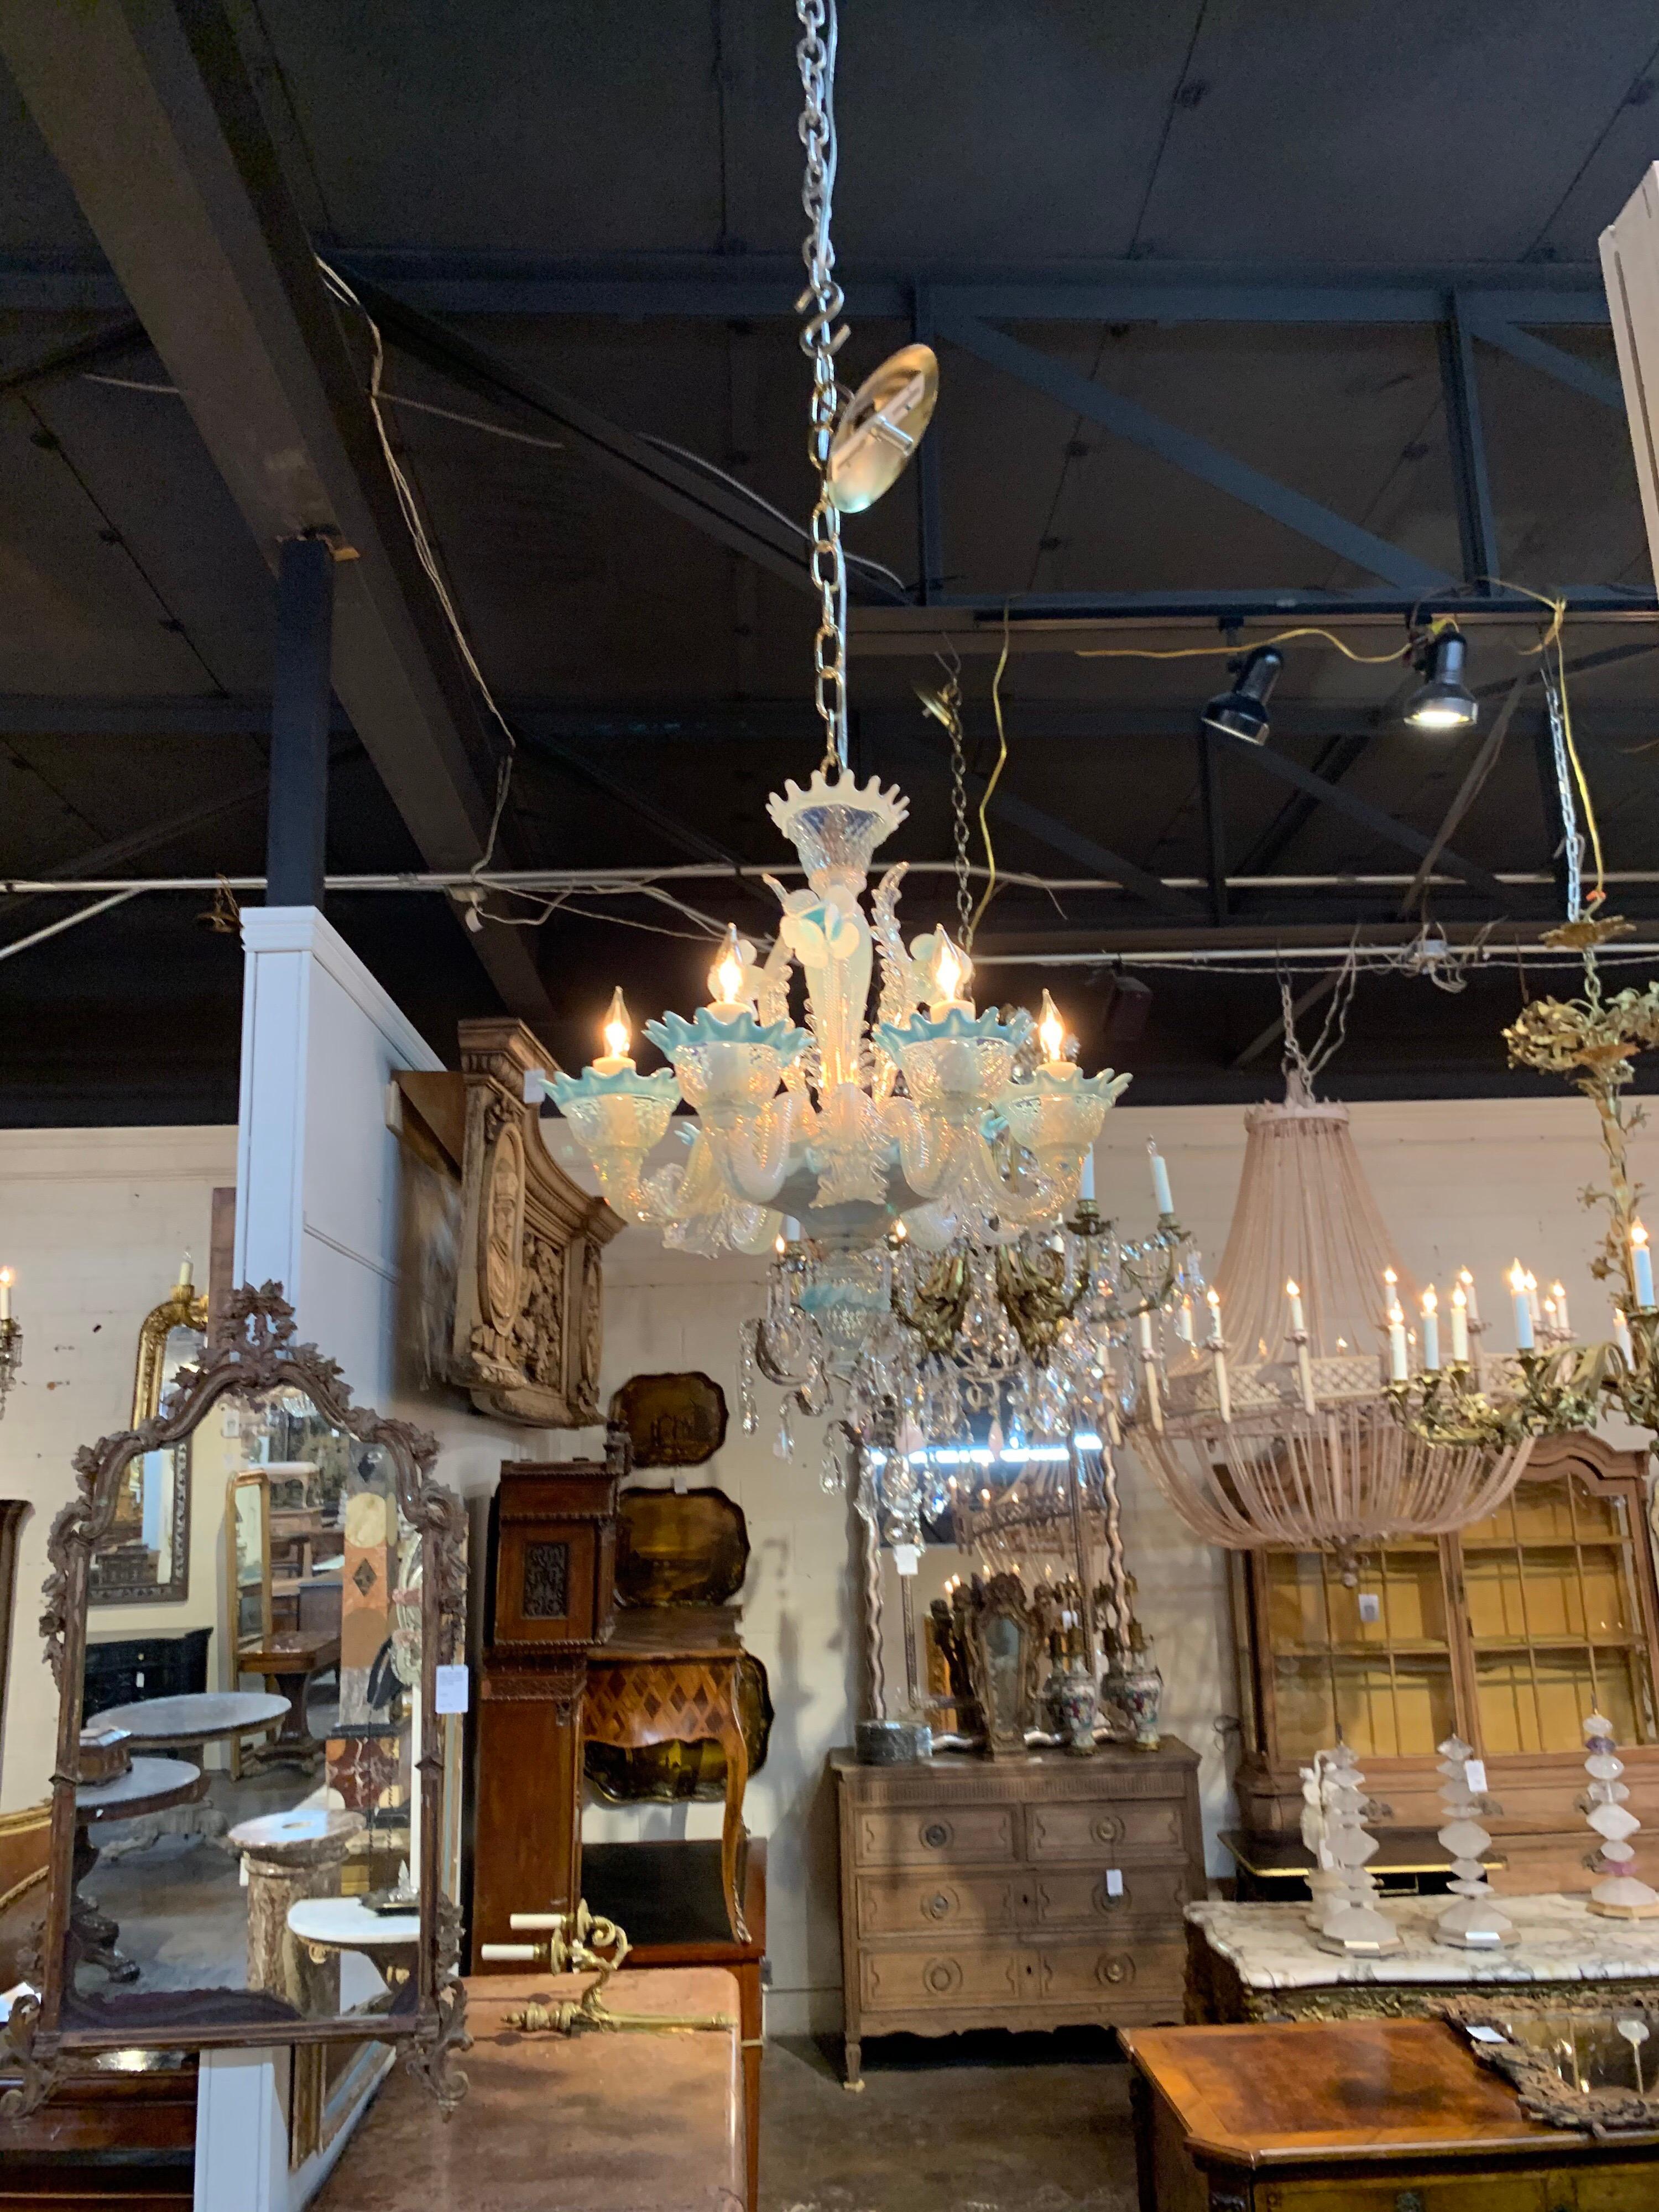 Adorable petite blue Murano glass chandelier. The chandelier has clear, milky white and pale blue glass and an array of leaves and flowers. Note the small size. Very rare and hard to find. So pretty!